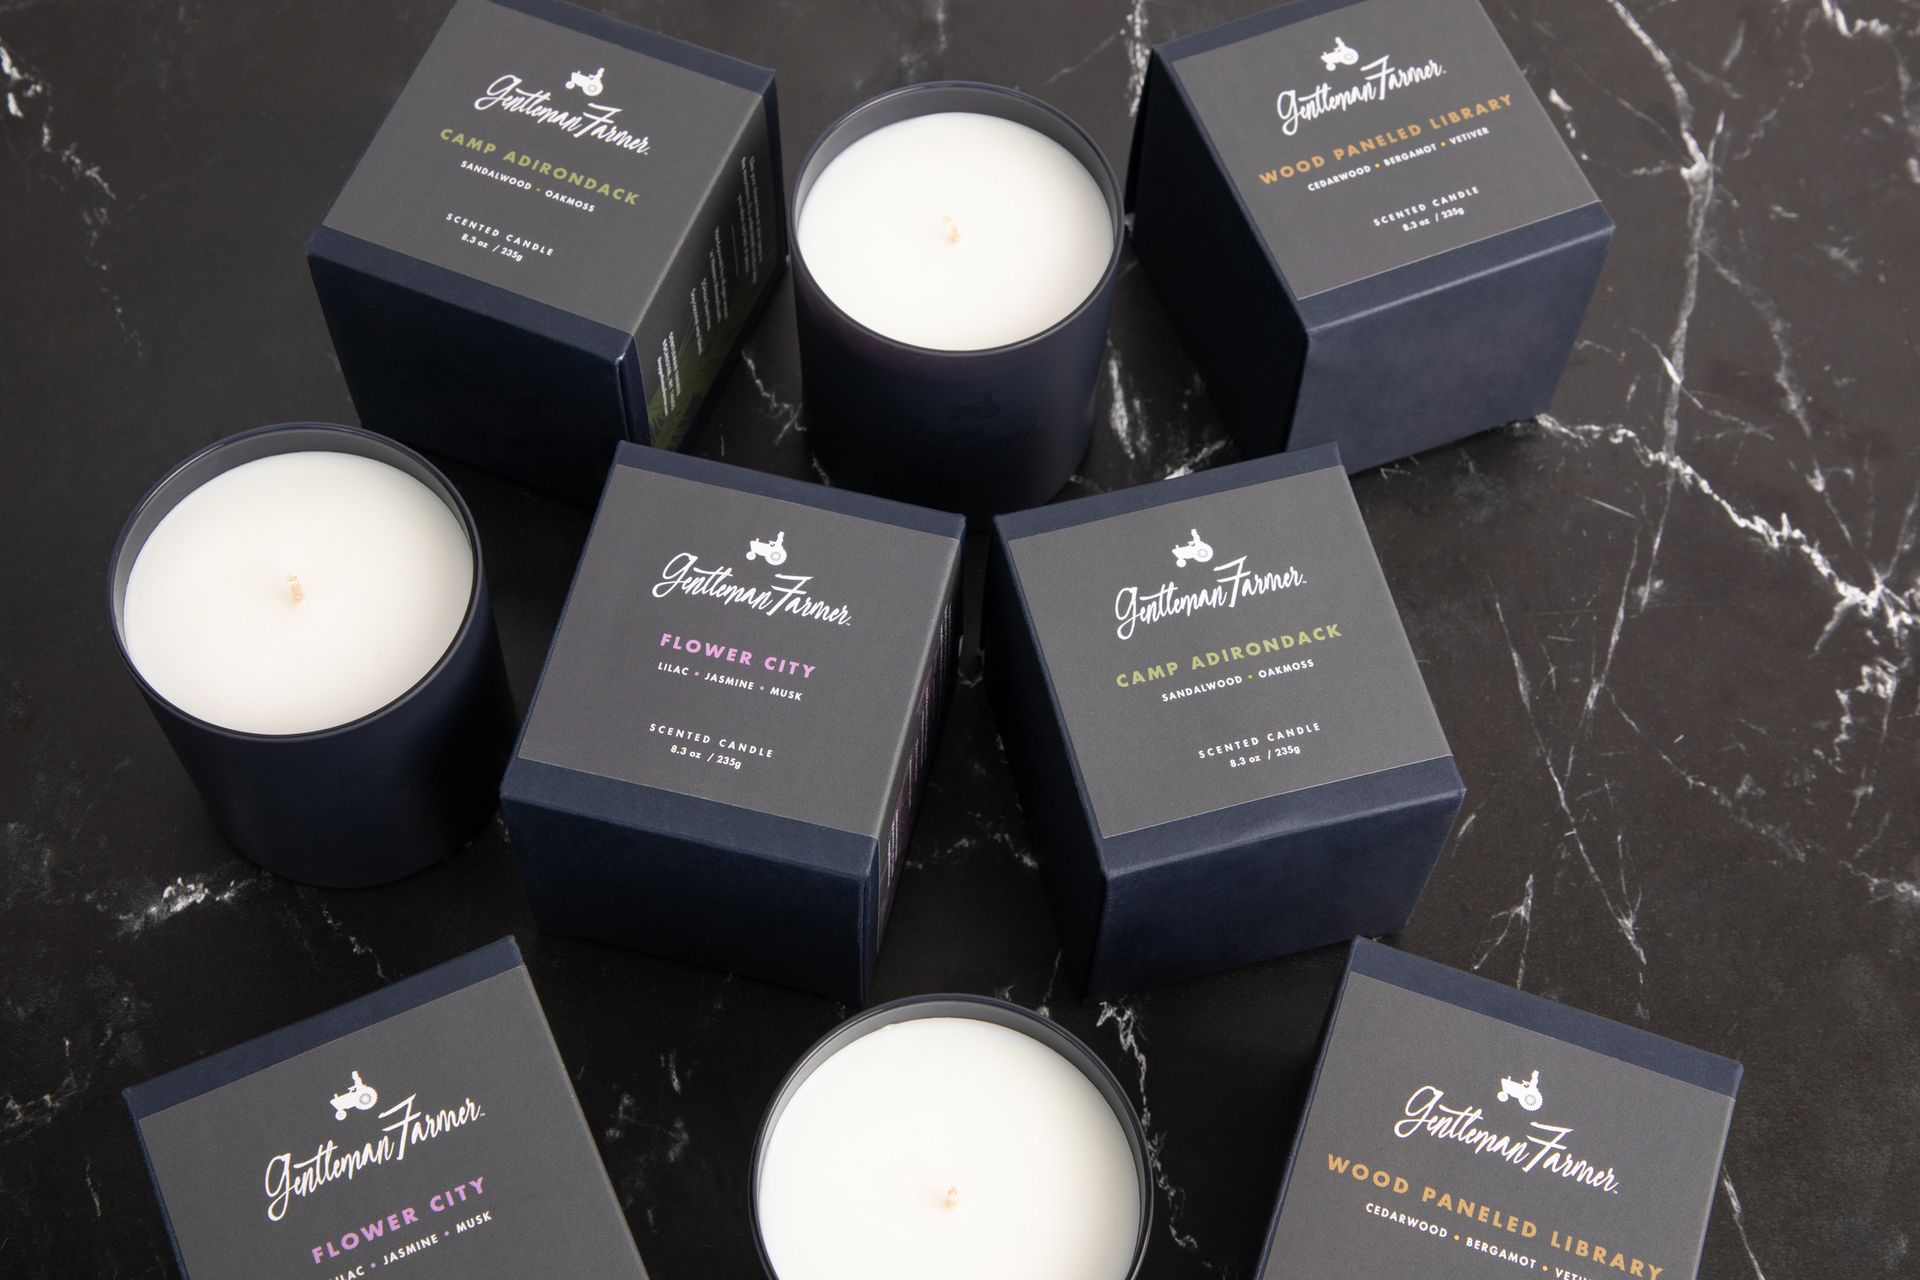 Gentleman Farmer scented candles and packages